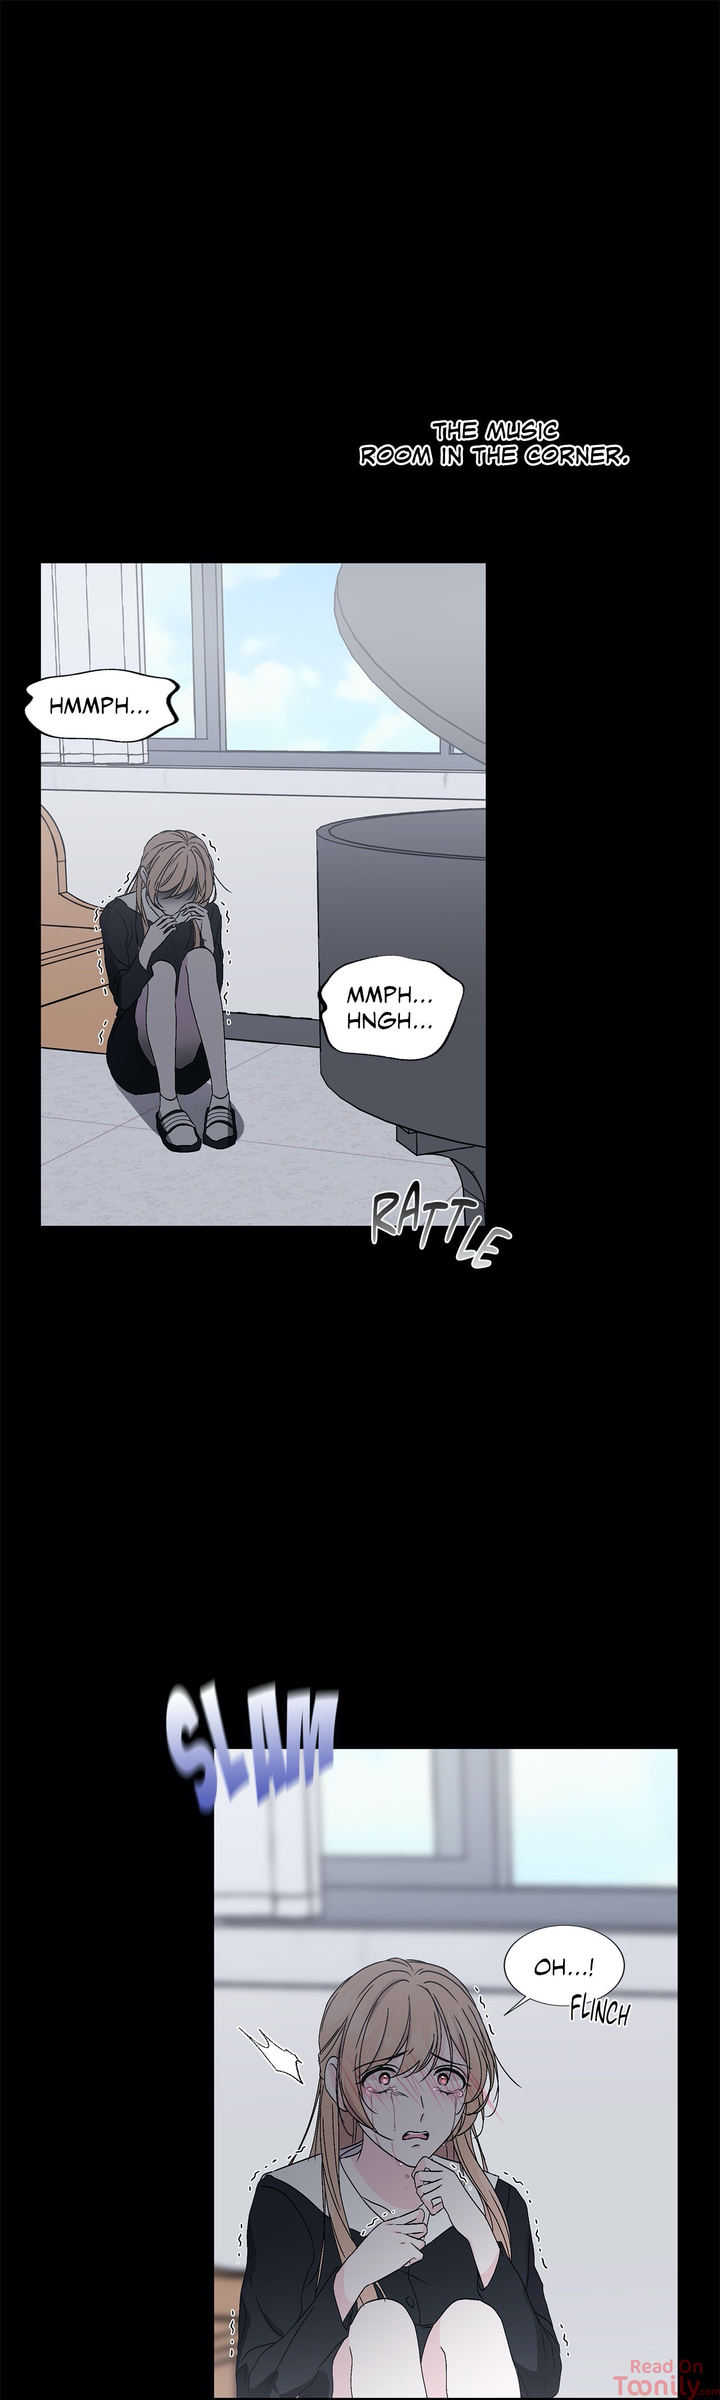 Lilith 2 Chapter 30 - Page 4